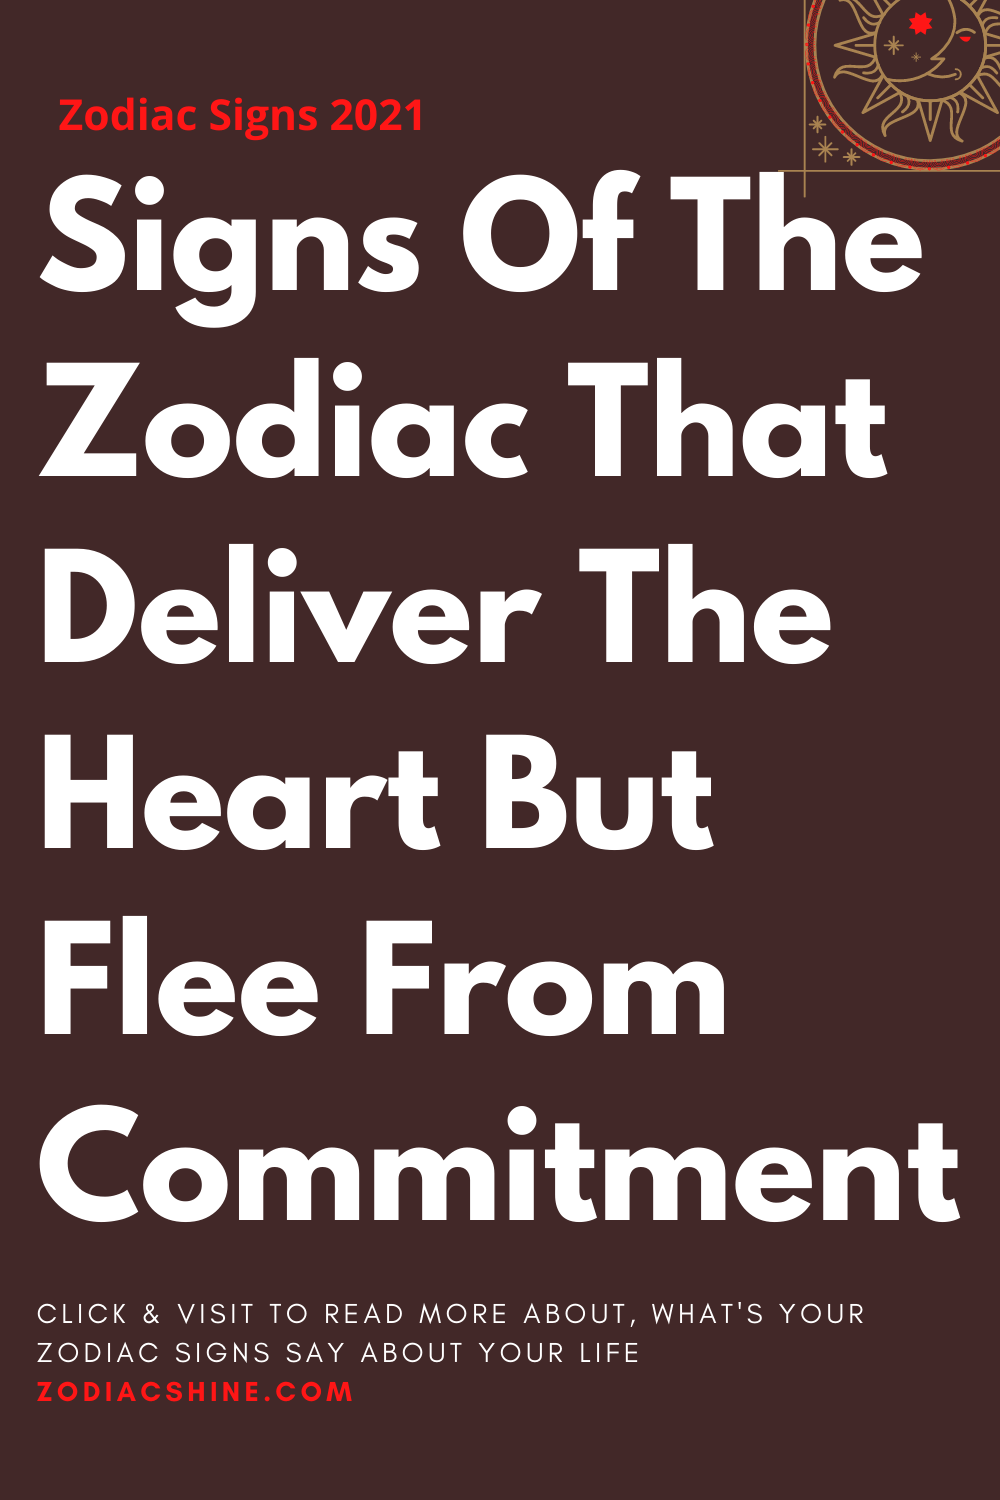 Signs Of The Zodiac That Deliver The Heart But Flee From Commitment